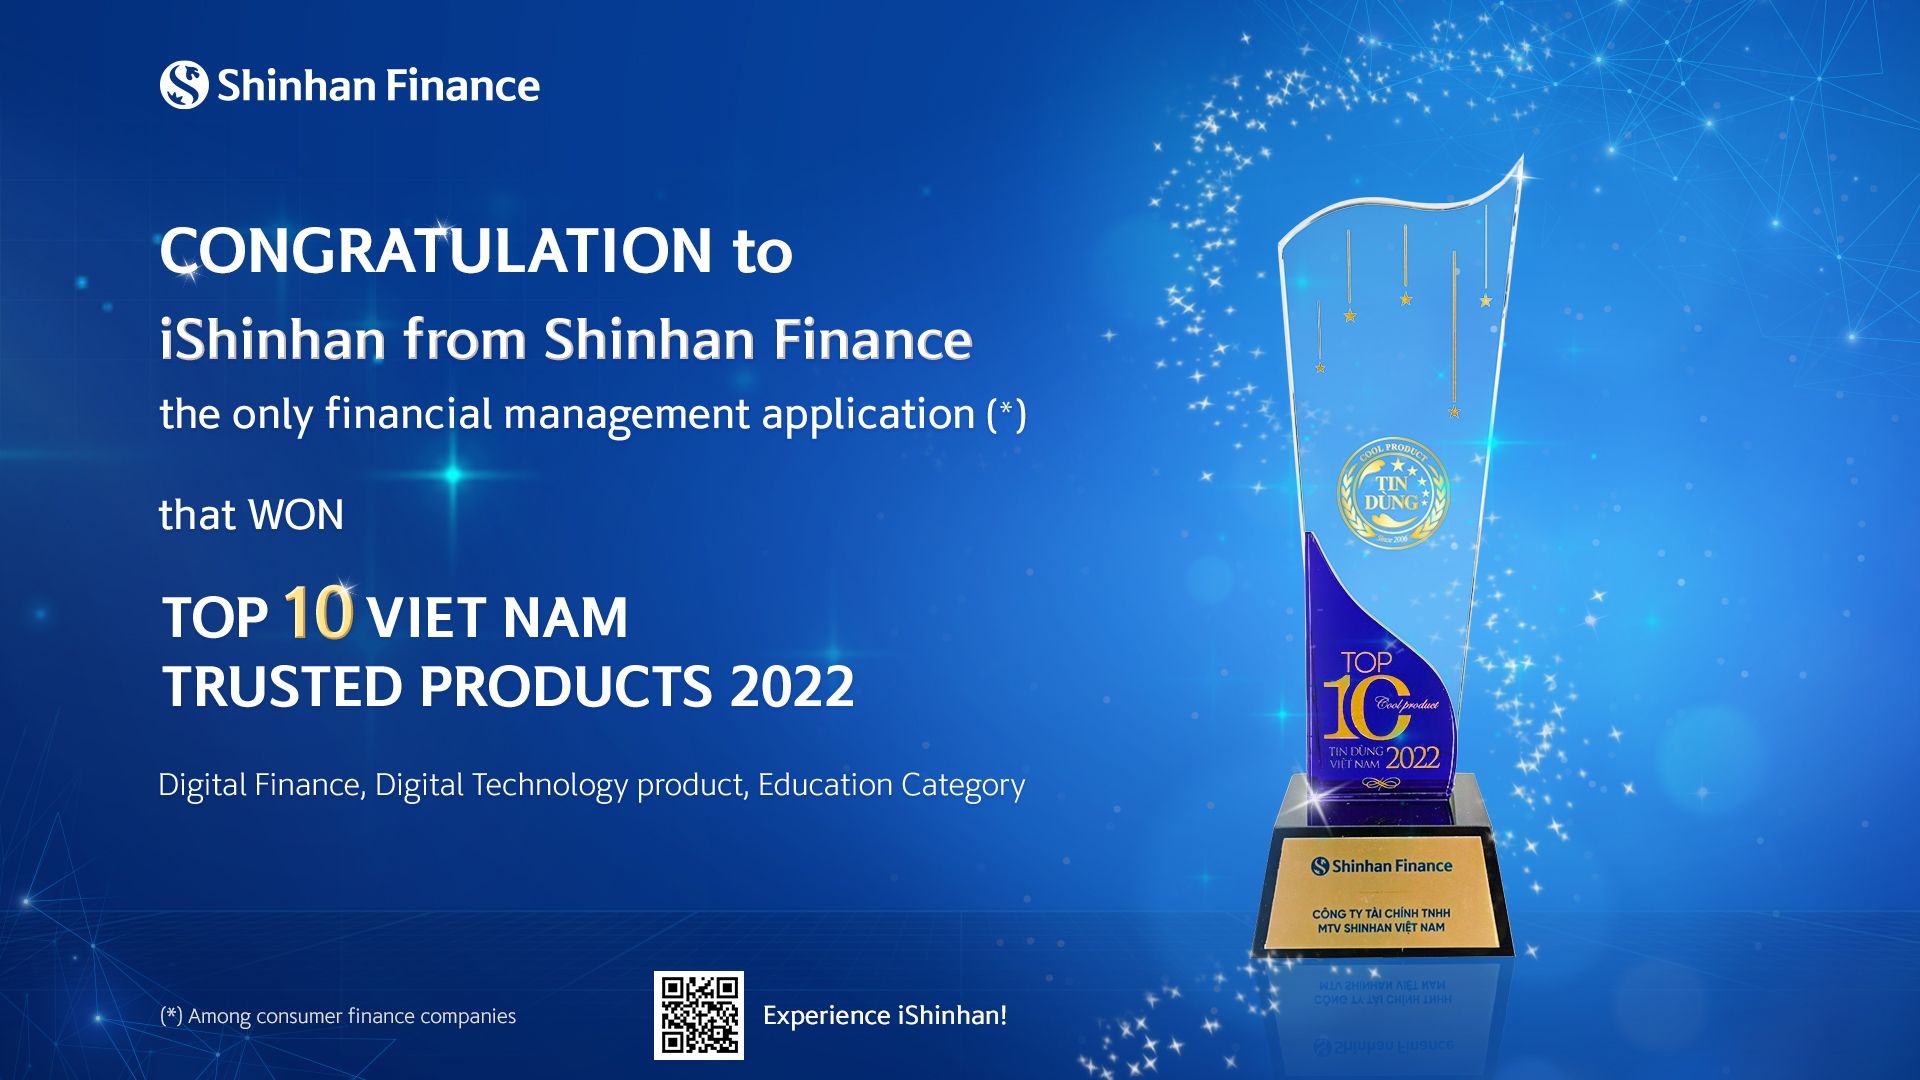 iShinhan from Shinhan Finance won Top 10 Vietnam Trusted Products 2022